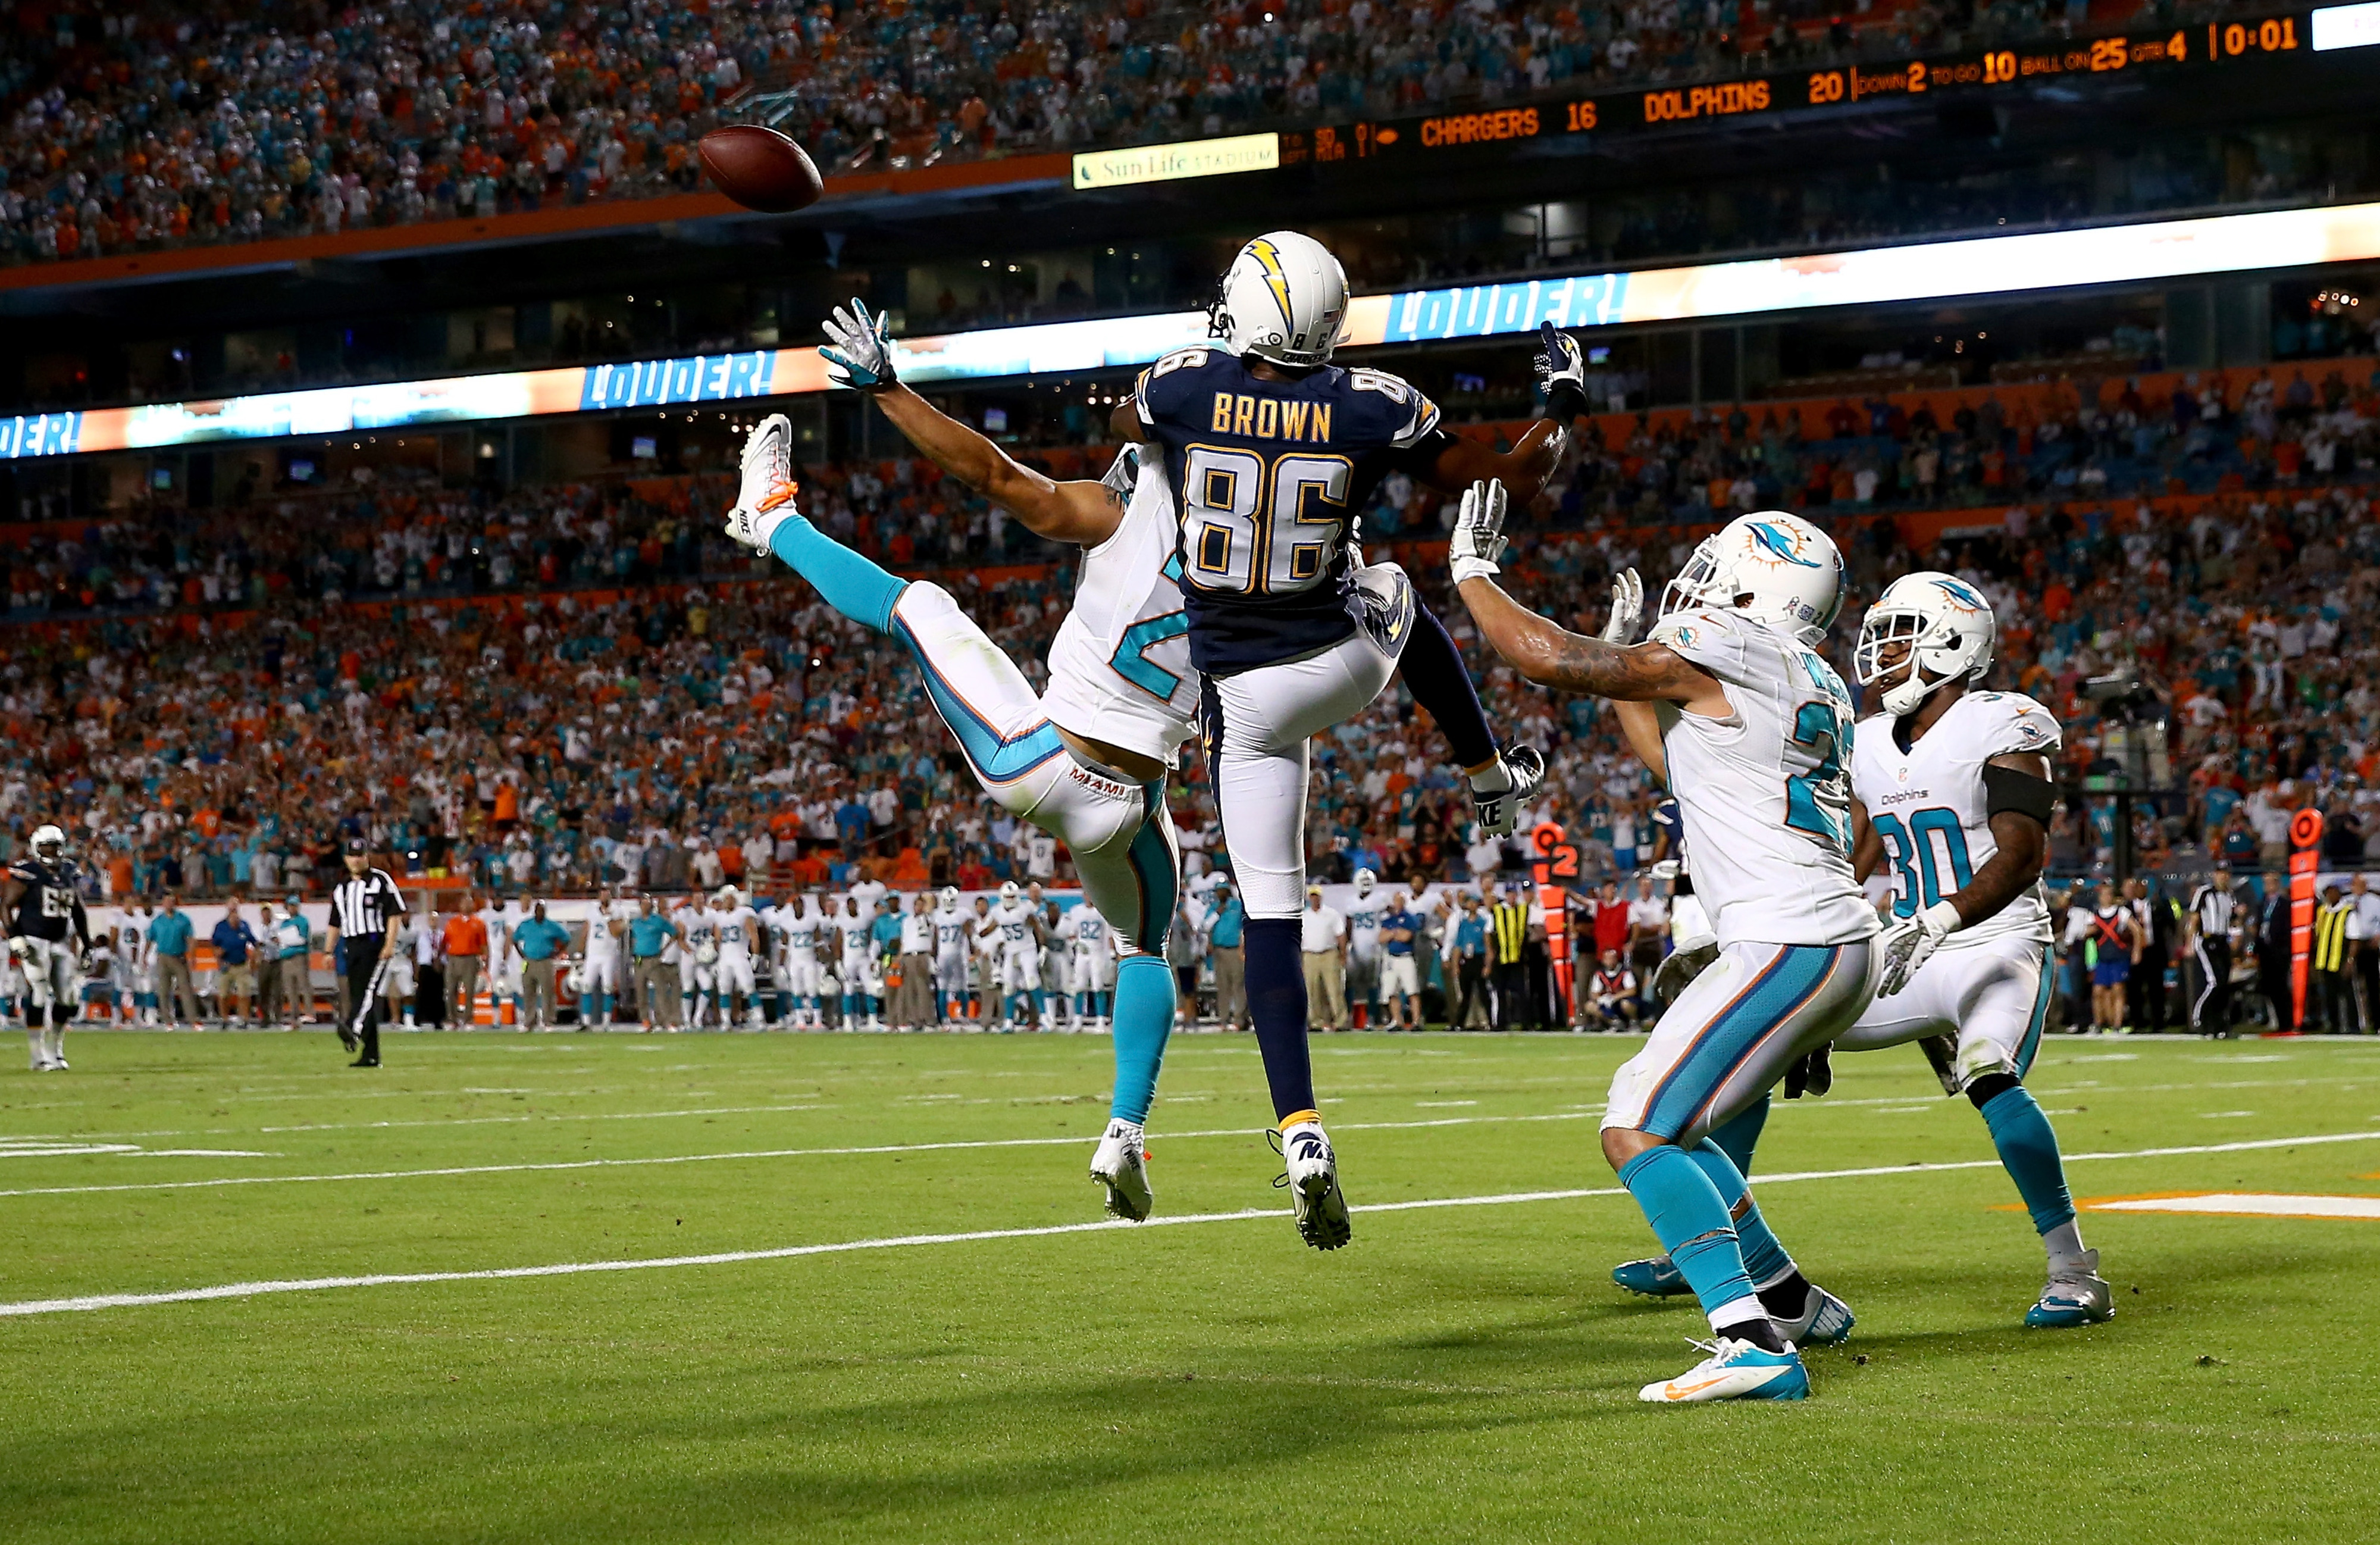 Brent Grimes saves the Dolphins by knocking down a Hail Mary pass